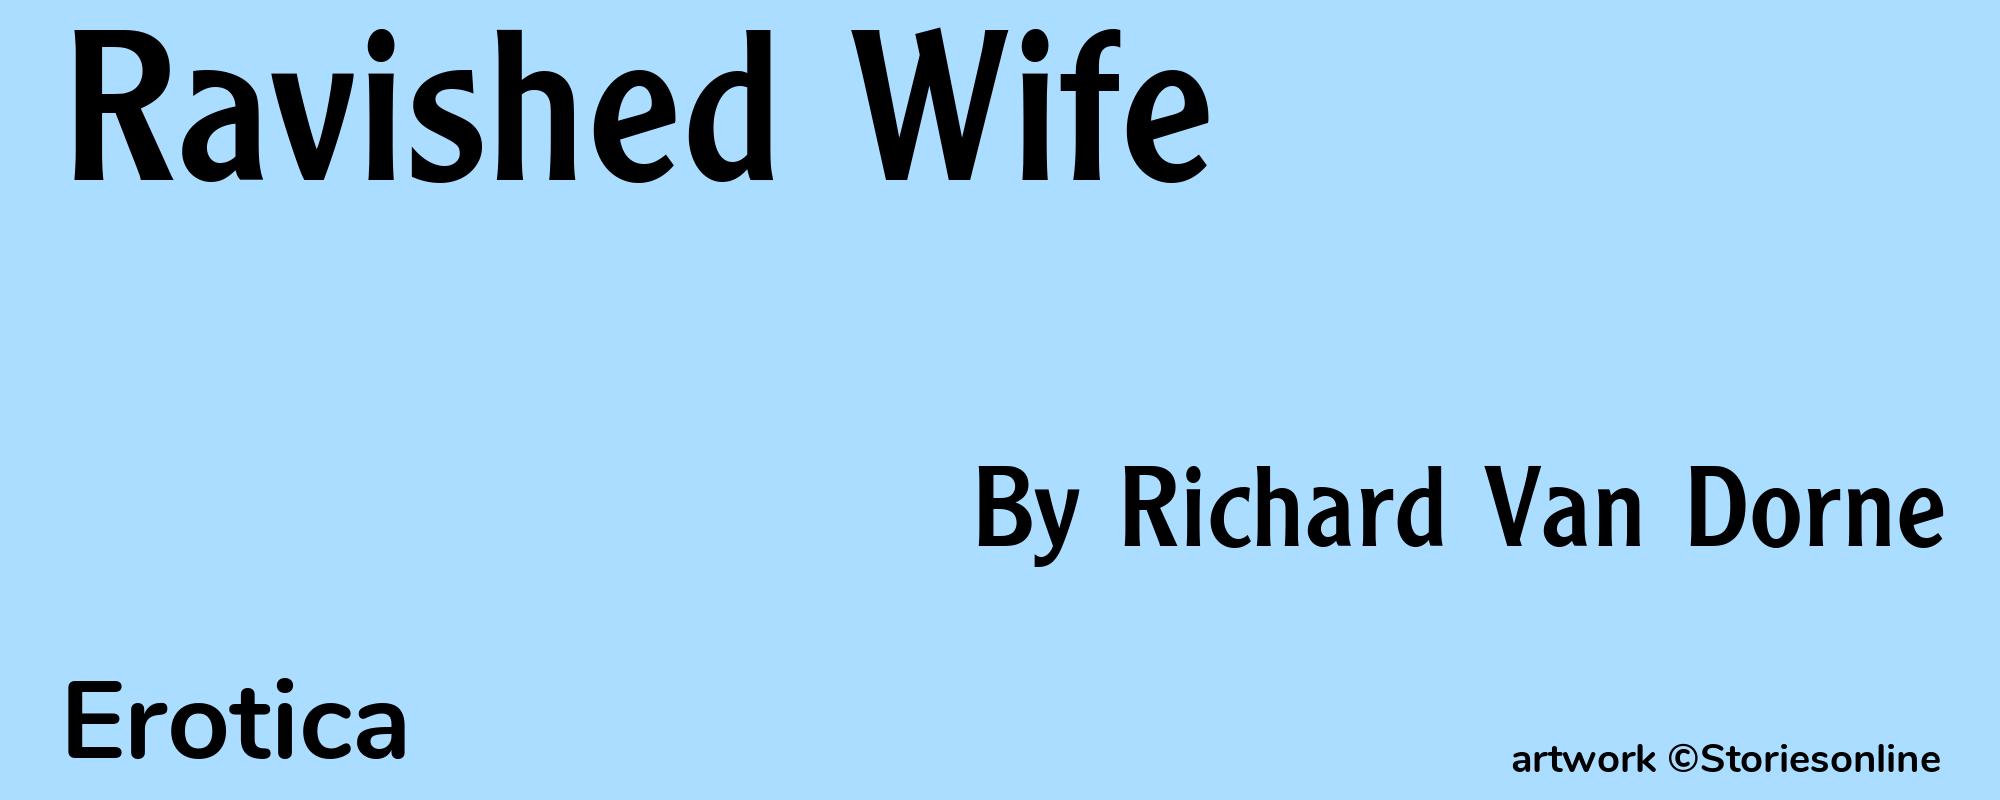 Ravished Wife - Cover